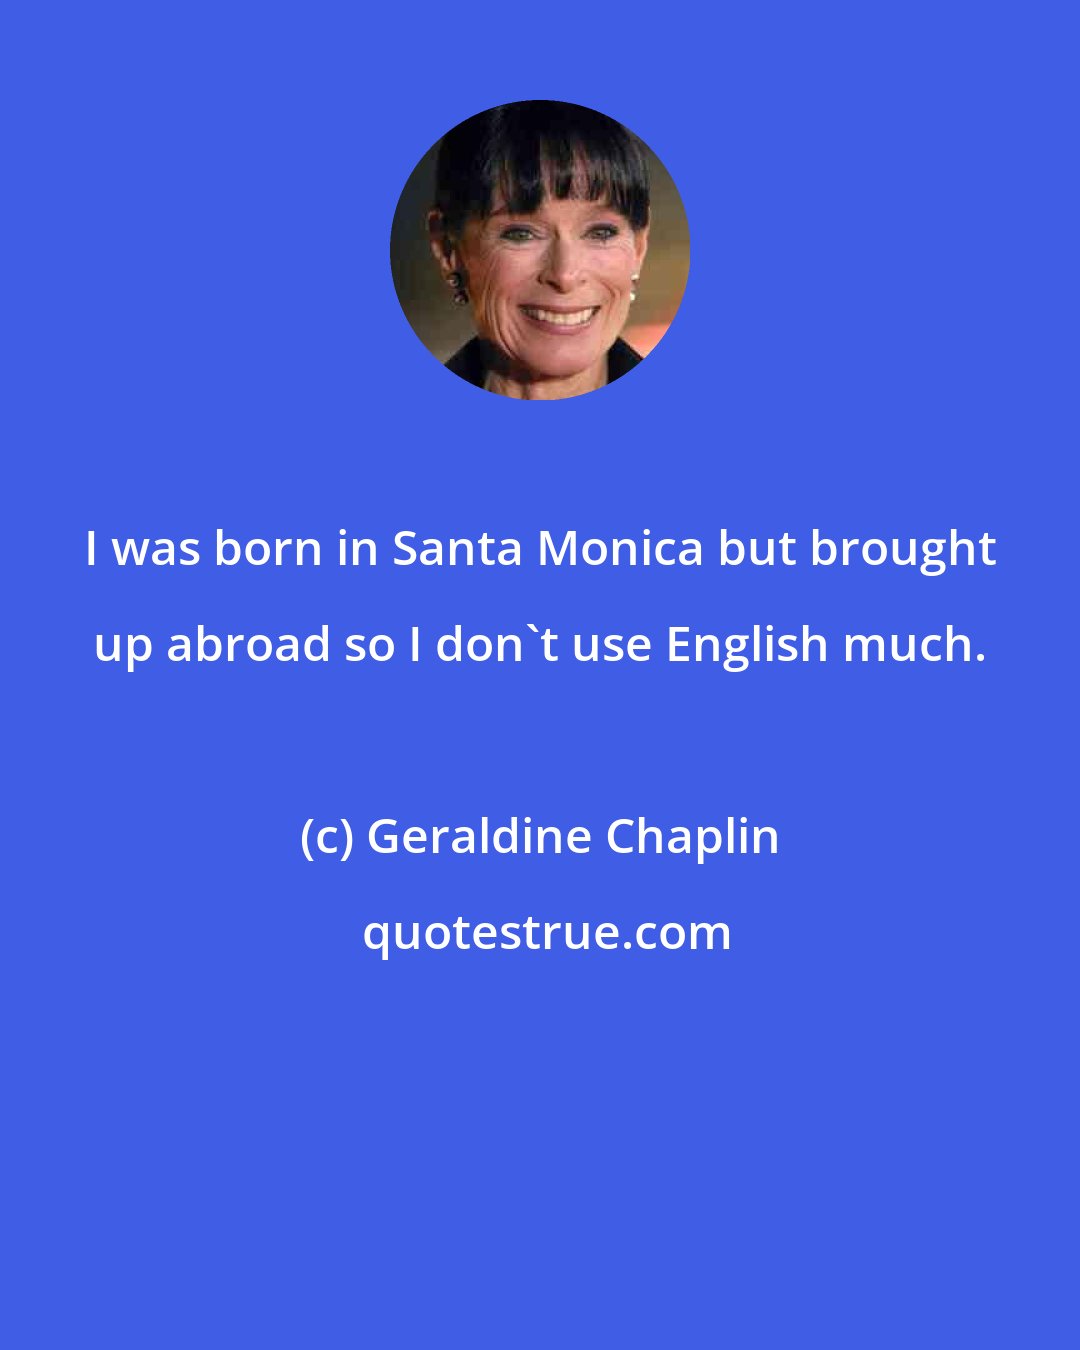 Geraldine Chaplin: I was born in Santa Monica but brought up abroad so I don't use English much.